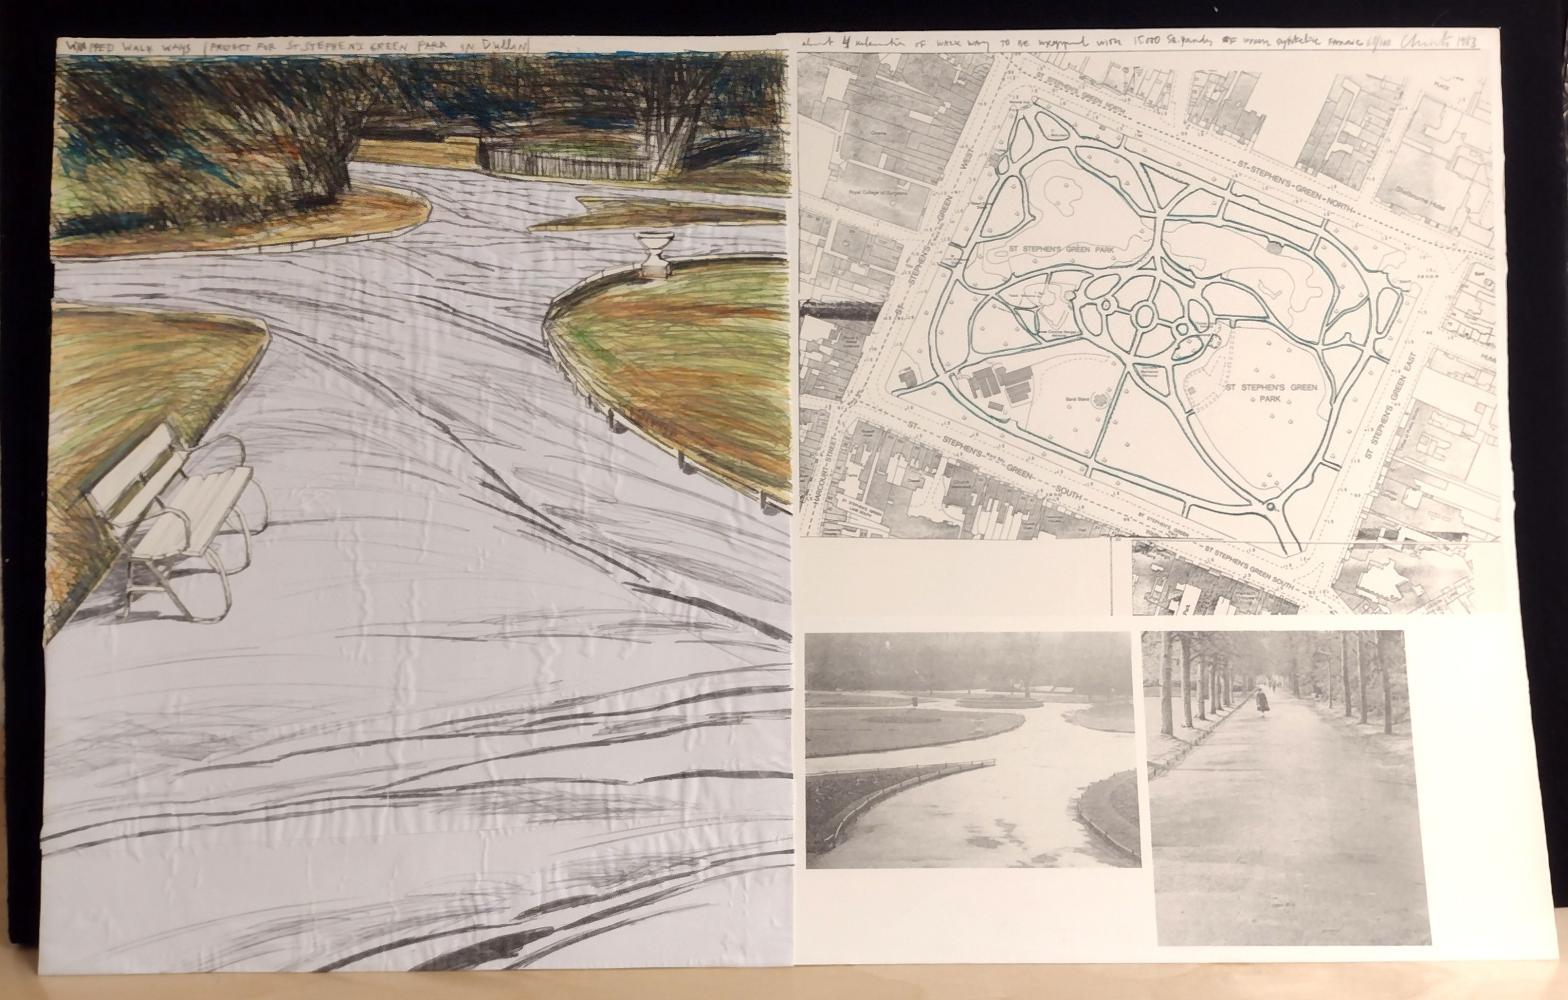 CHRISTO AND JEANNE-CLAUDE, VERPACKTE WEGE, 1983 - MIXED MEDIA - Print by Christo and Jeanne-Claude